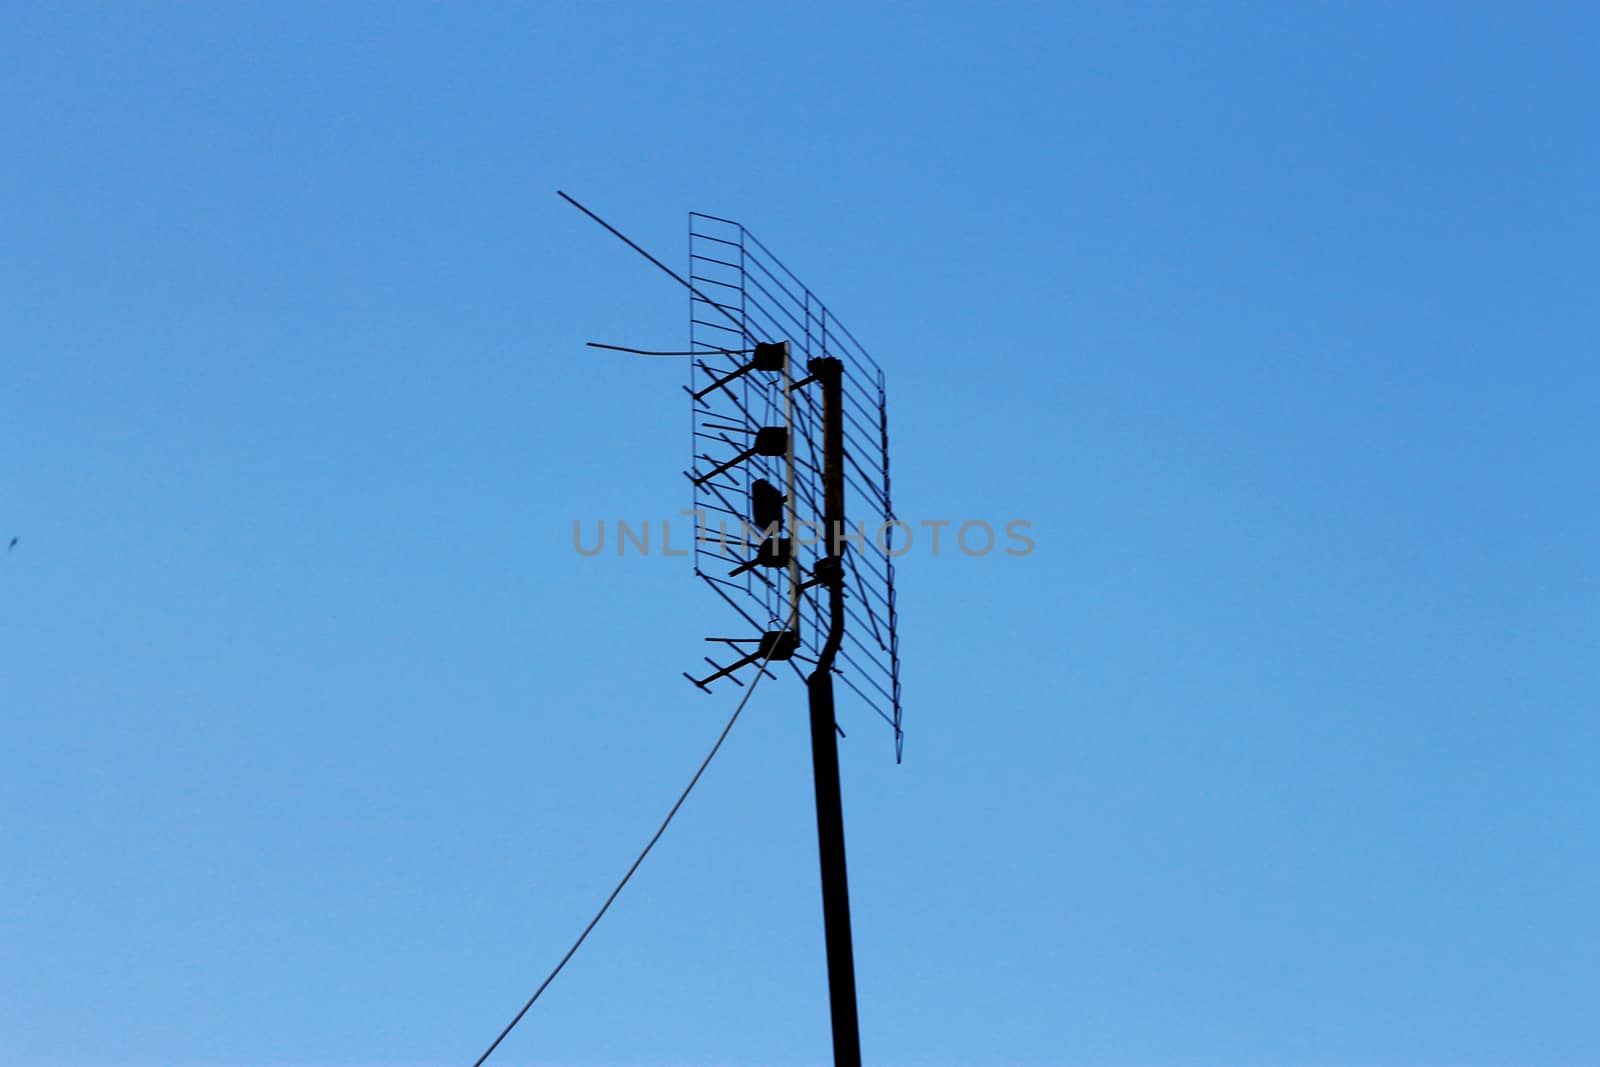 Television antenna for home TV in blue sky